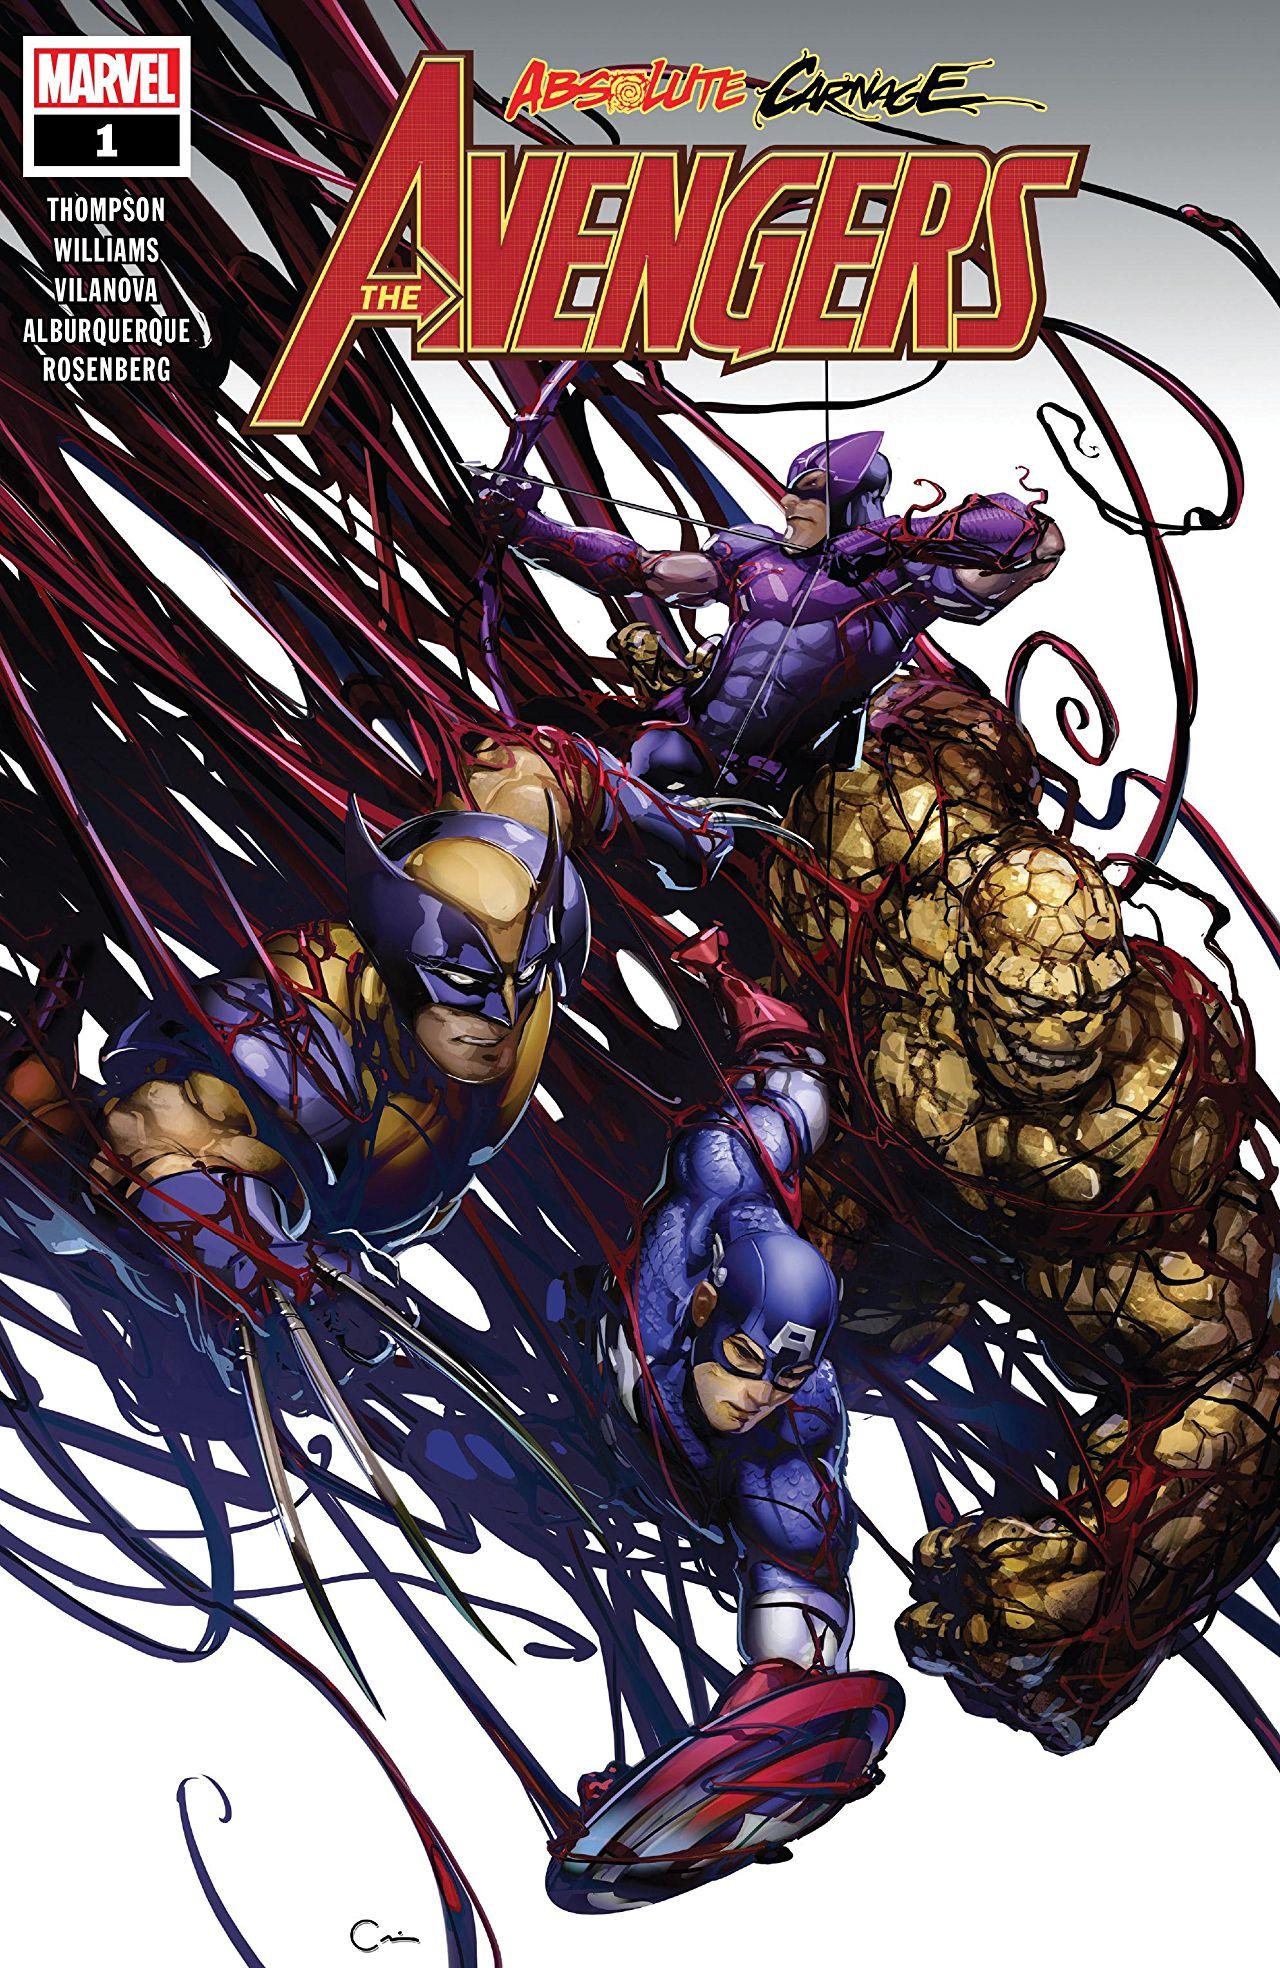 Absolute Carnage: Avengers Vol. 1 #1